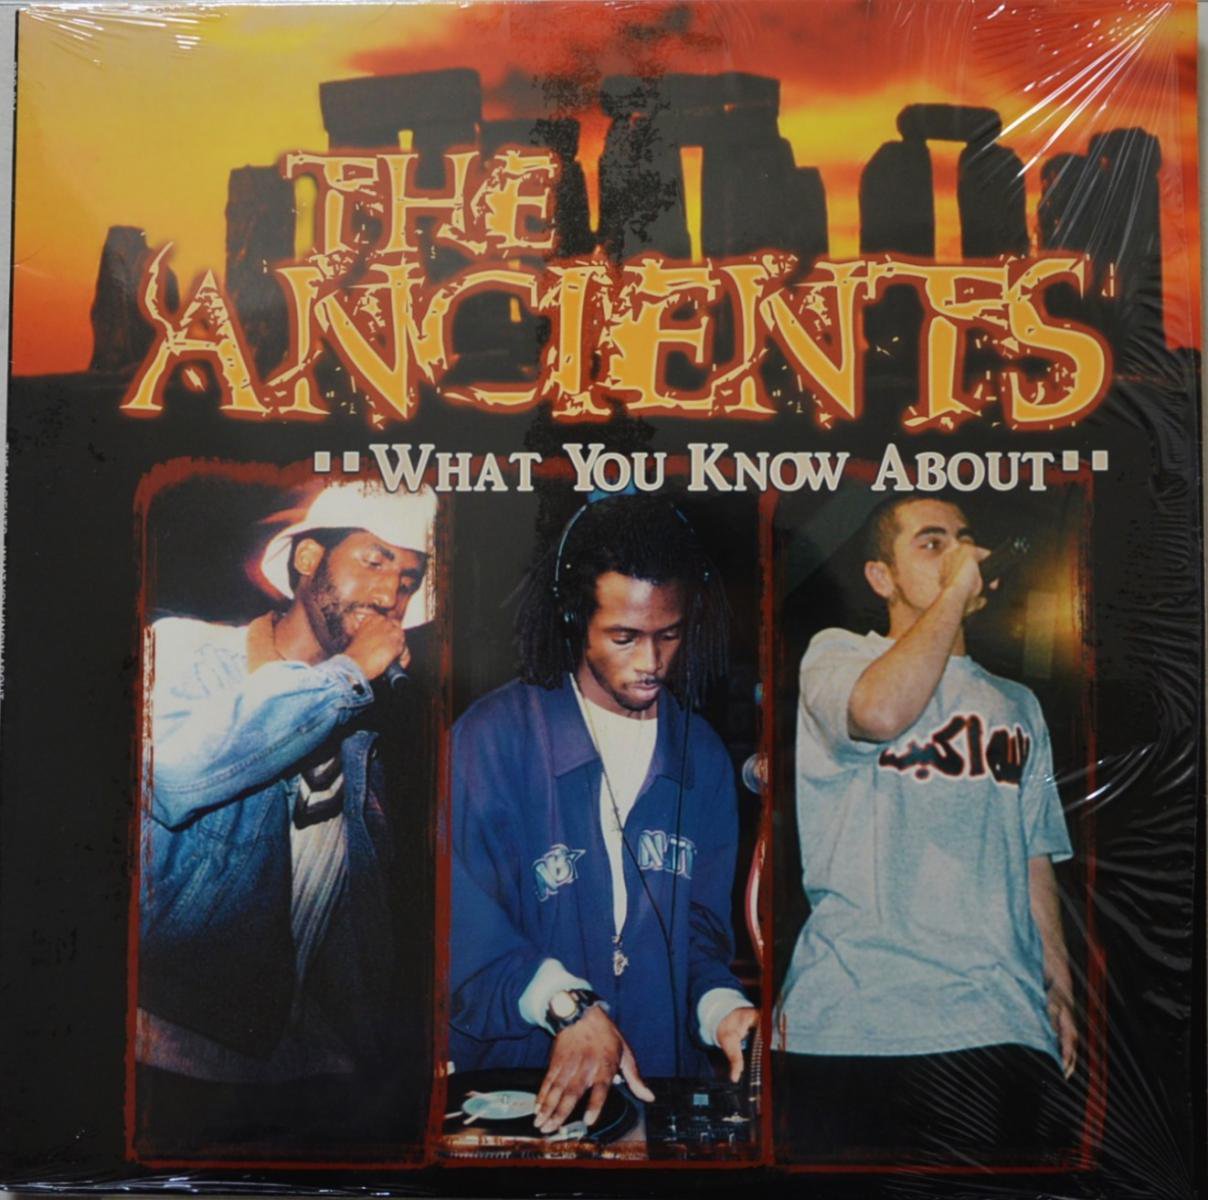 THE ANCIENTS ‎/ WHAT YOU KNOW ABOUT / 20/20 (PROD BY CELPH TITLED) (12